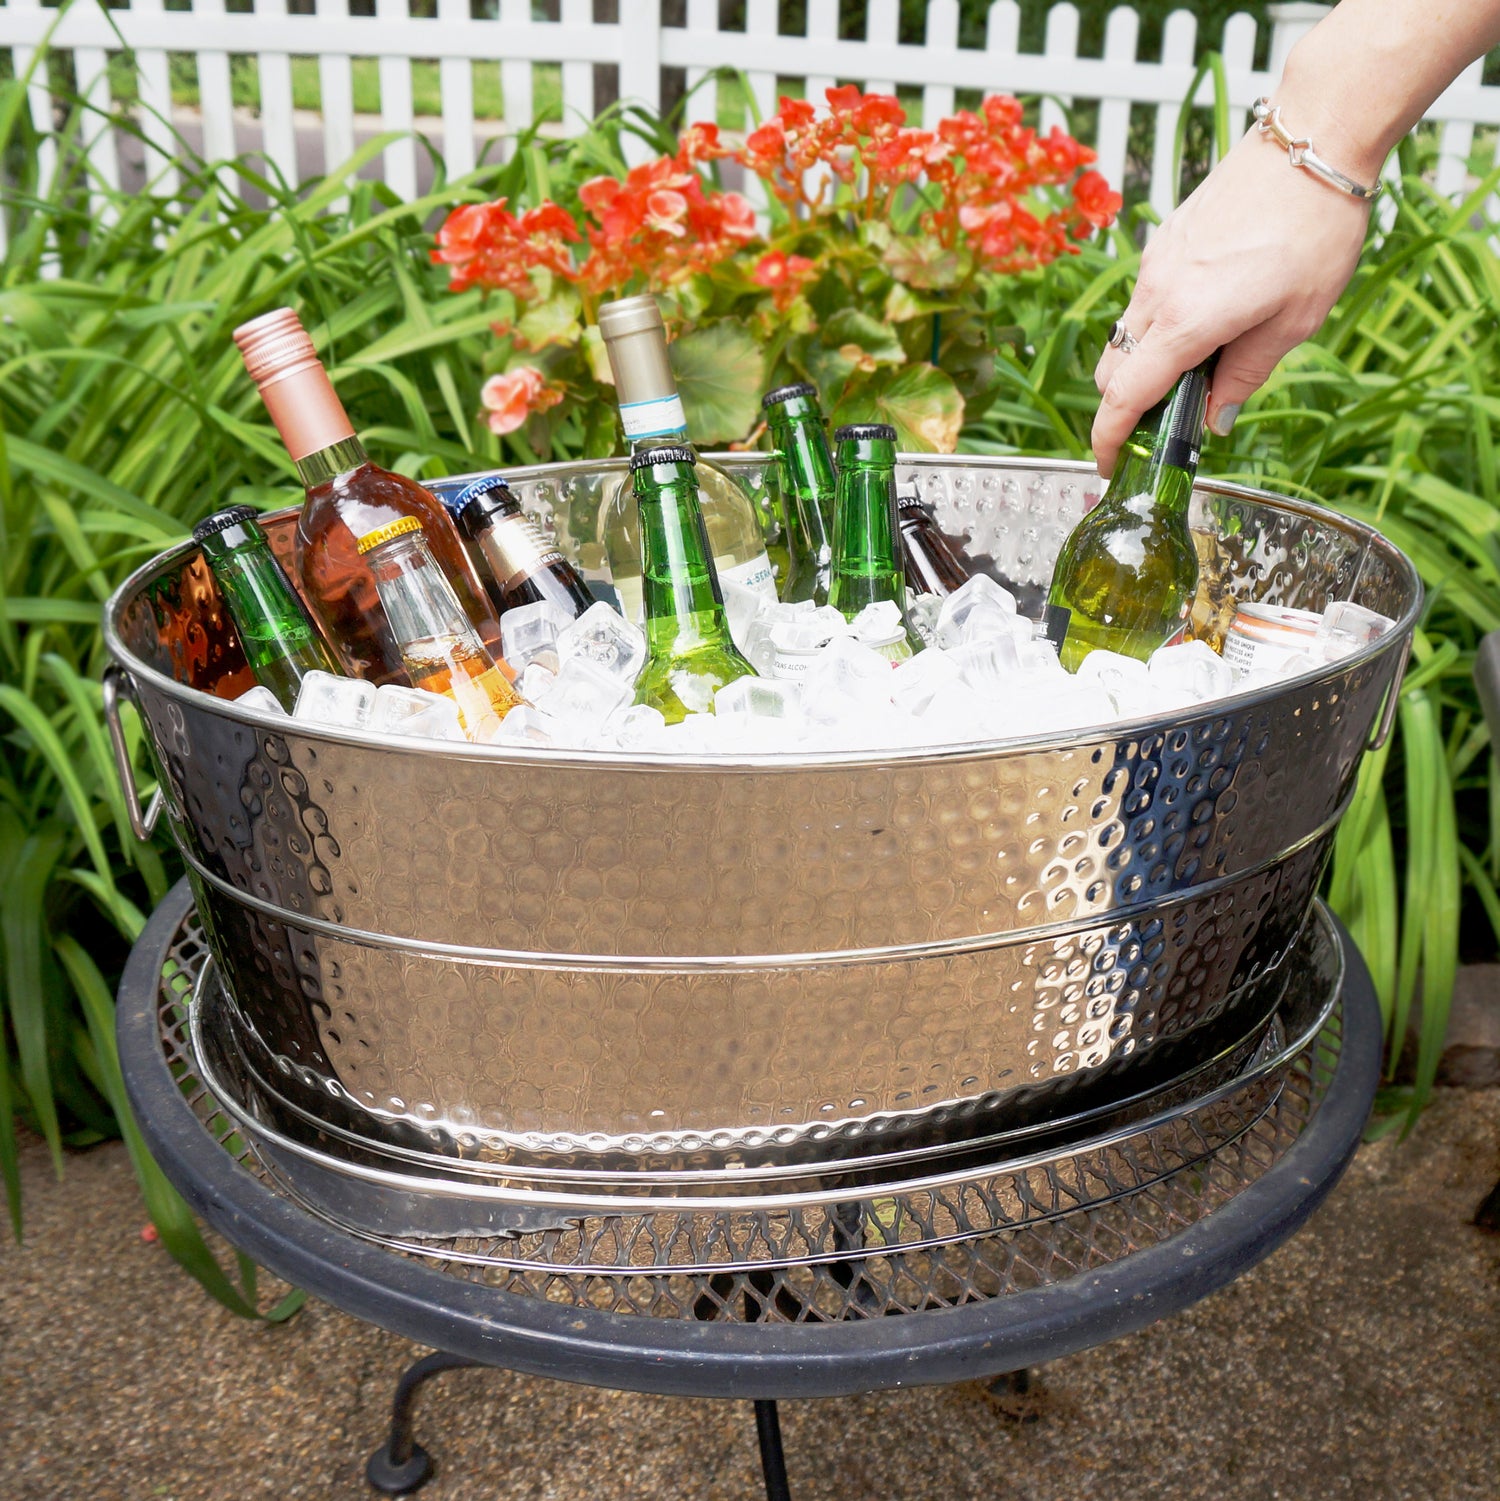 Beverage tub with party tray set for parties.  Chill and serve wine, beer, champagne or other drinks at parties indoors or out on the patio.  Large size holds all of the drinks for your party guests.  Includes a durable hammered exterior and sealed bottom to prevent leaking and rust.  Tray catches pesky party spills, splashes, and party tub condensation for a mess free party experience.